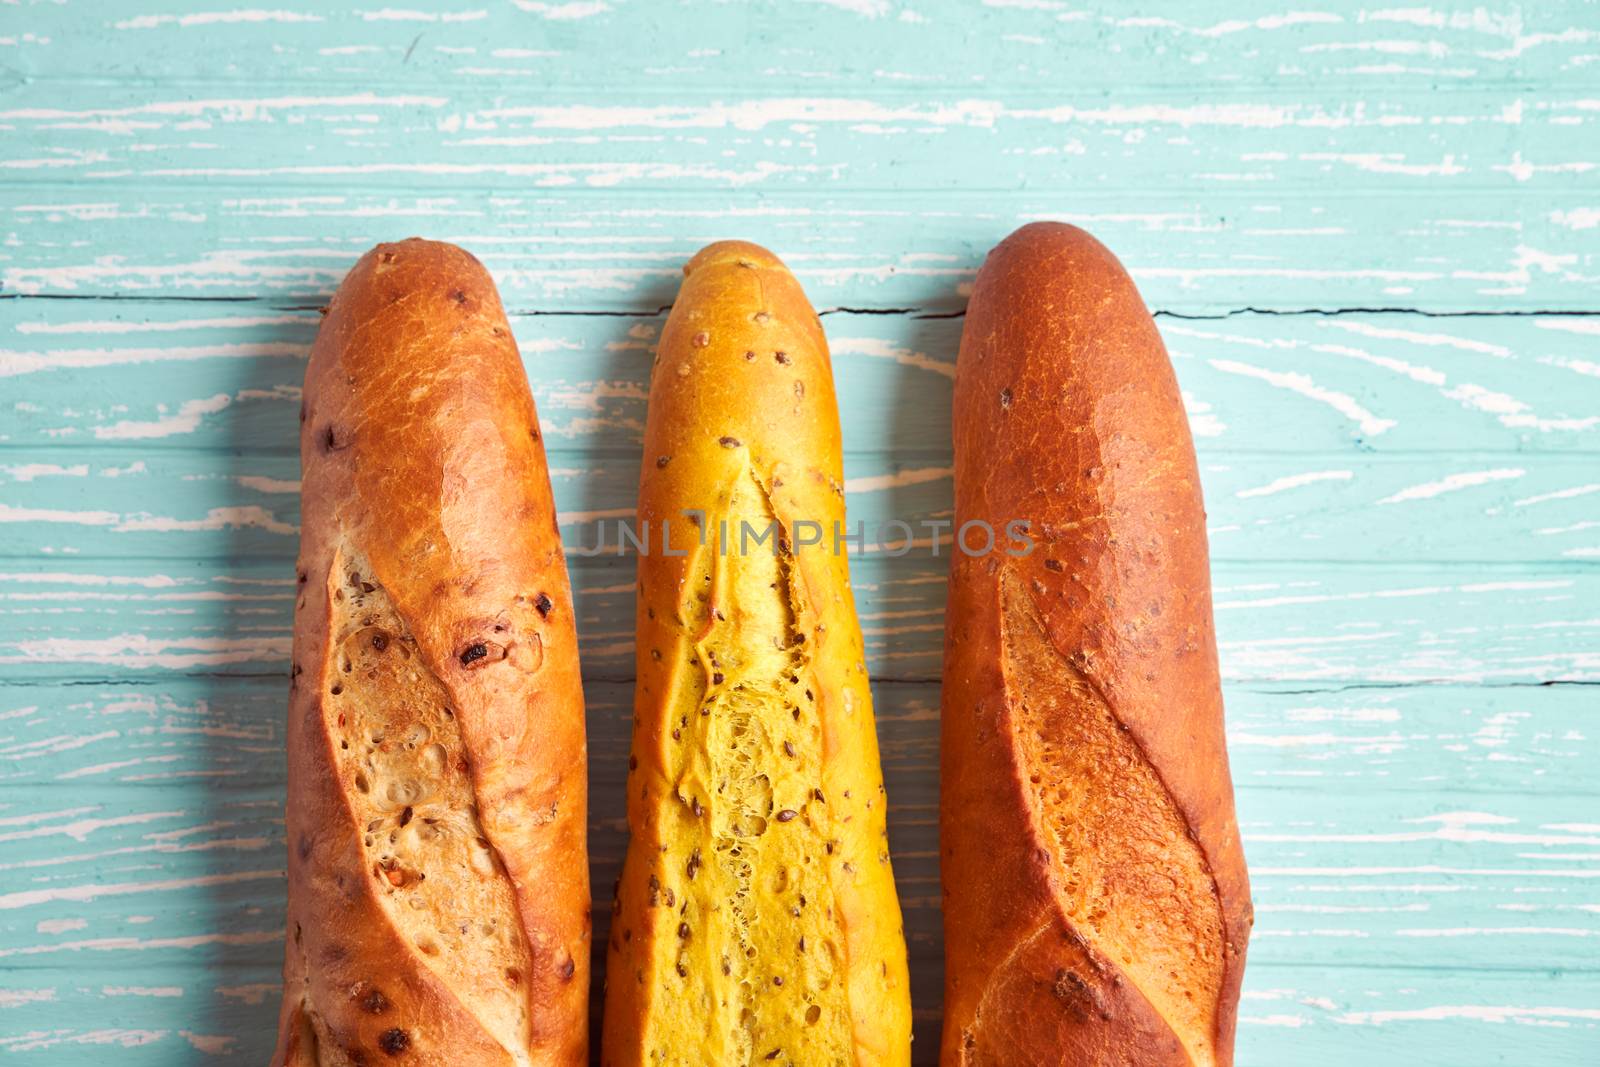 Three crispy french baguettes lie blue wooden background baguettes in assortment with sesame seeds Classic french national pastries Copy space Concept for menu or advertising